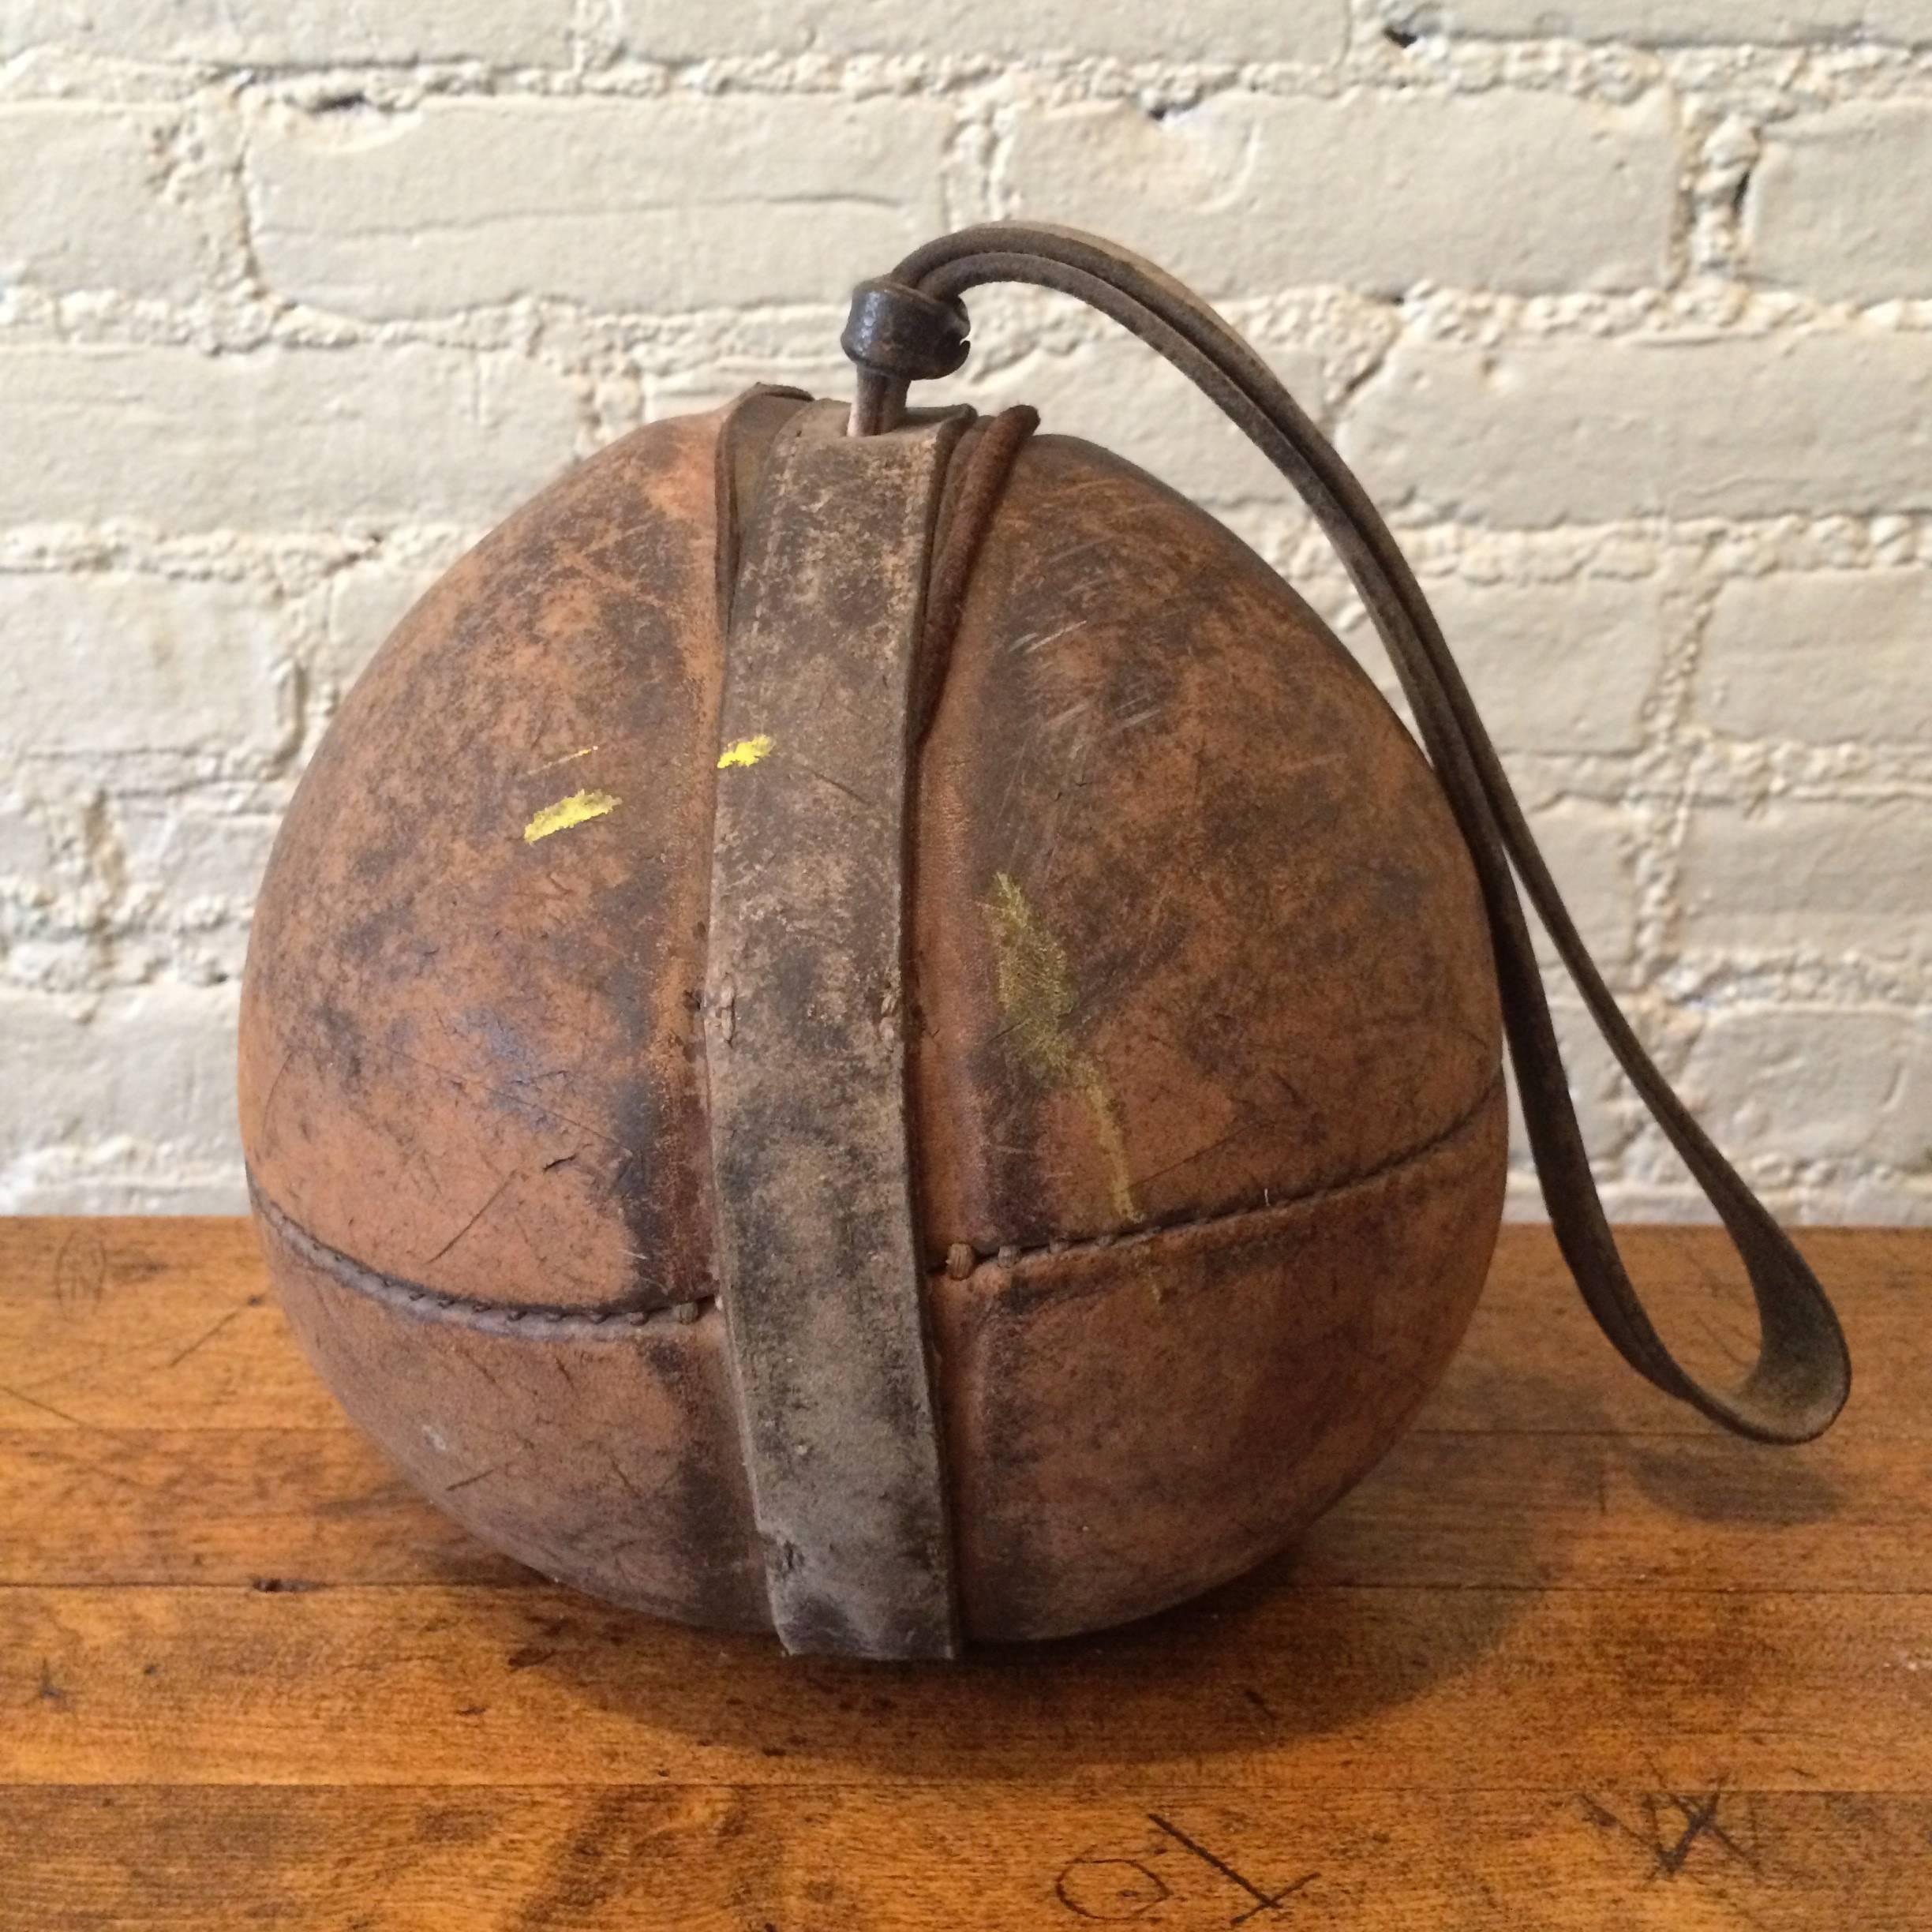 1930s, German, leather, gymnasium, medicine ball with strap.